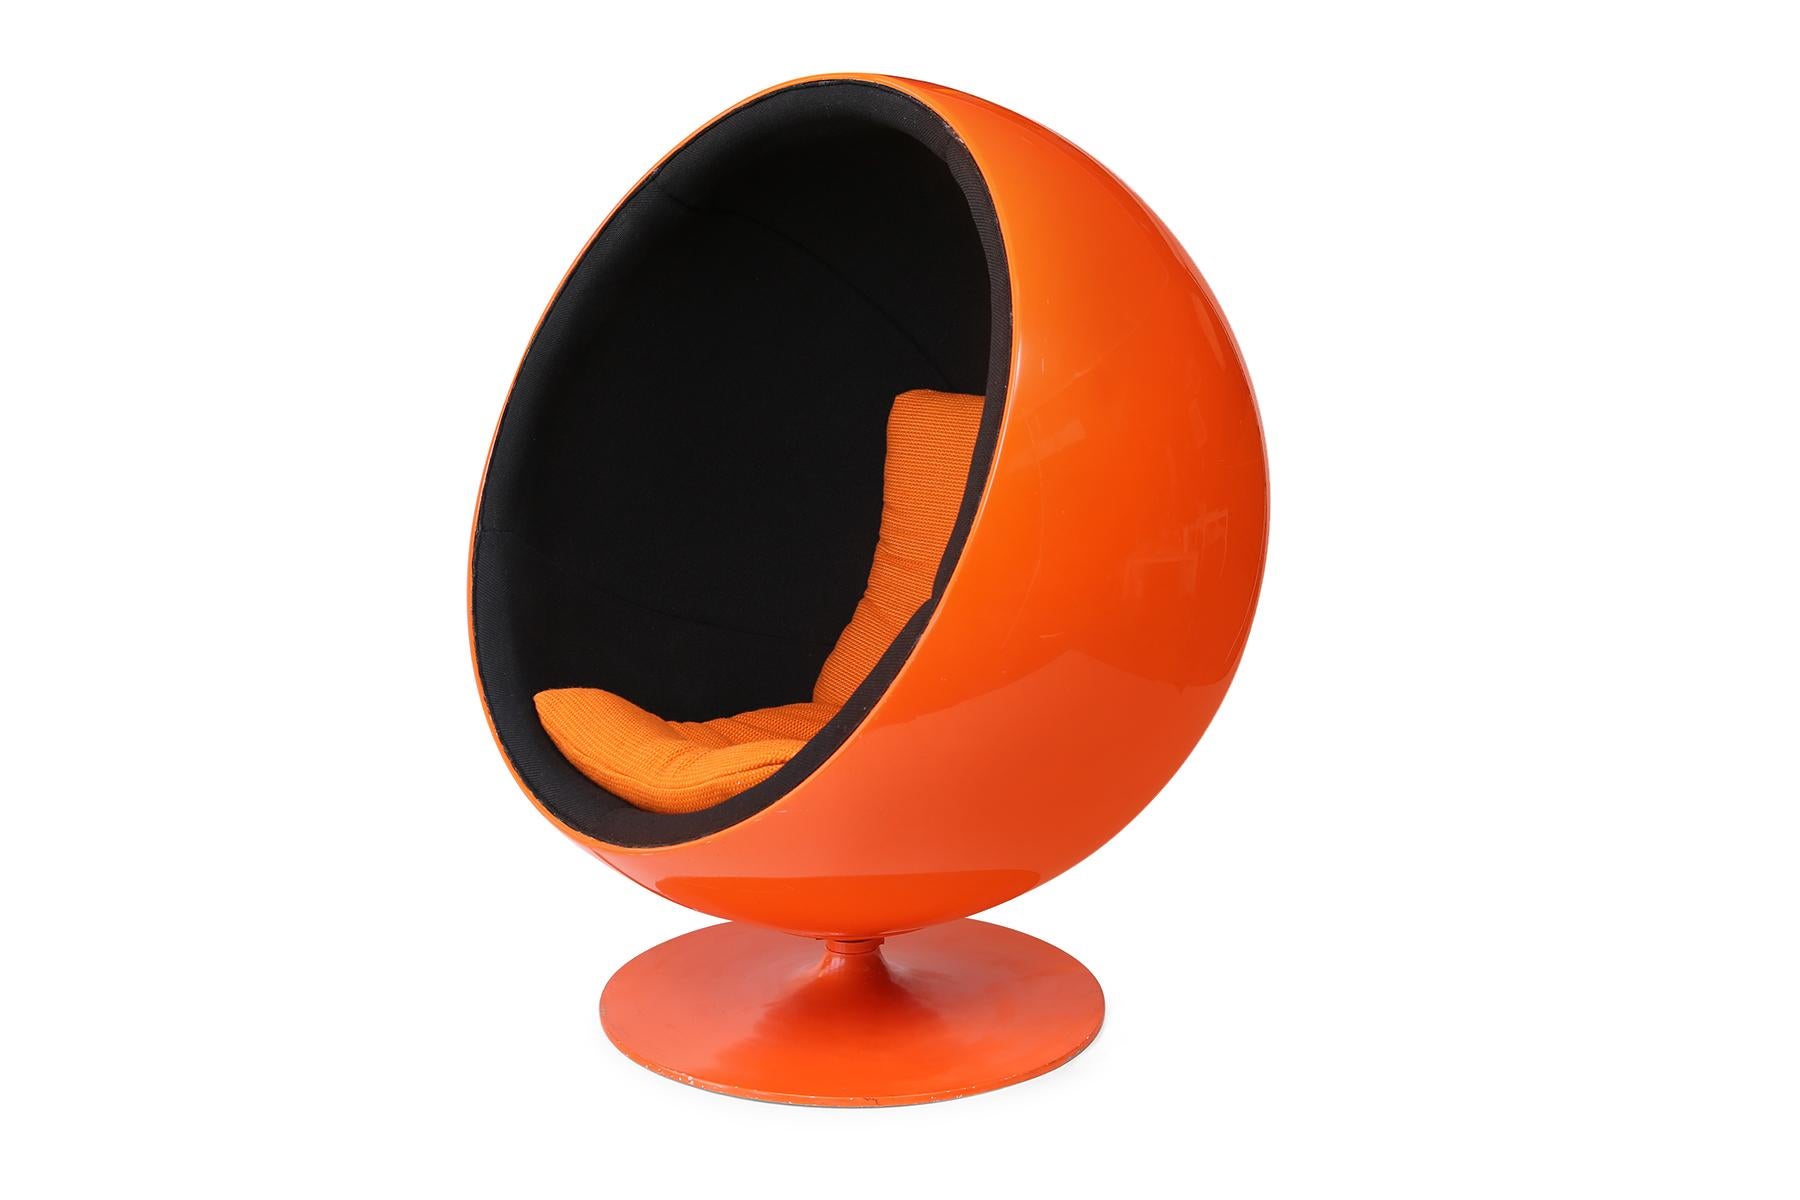 The unforgettable ball chair was first created in 1963 by Eero Aarnio and then it later debuted at the Cologne Furniture Fair in 1966. This internationally recognized chair is the quintessential Pop accessory and a fantastic expression of classic